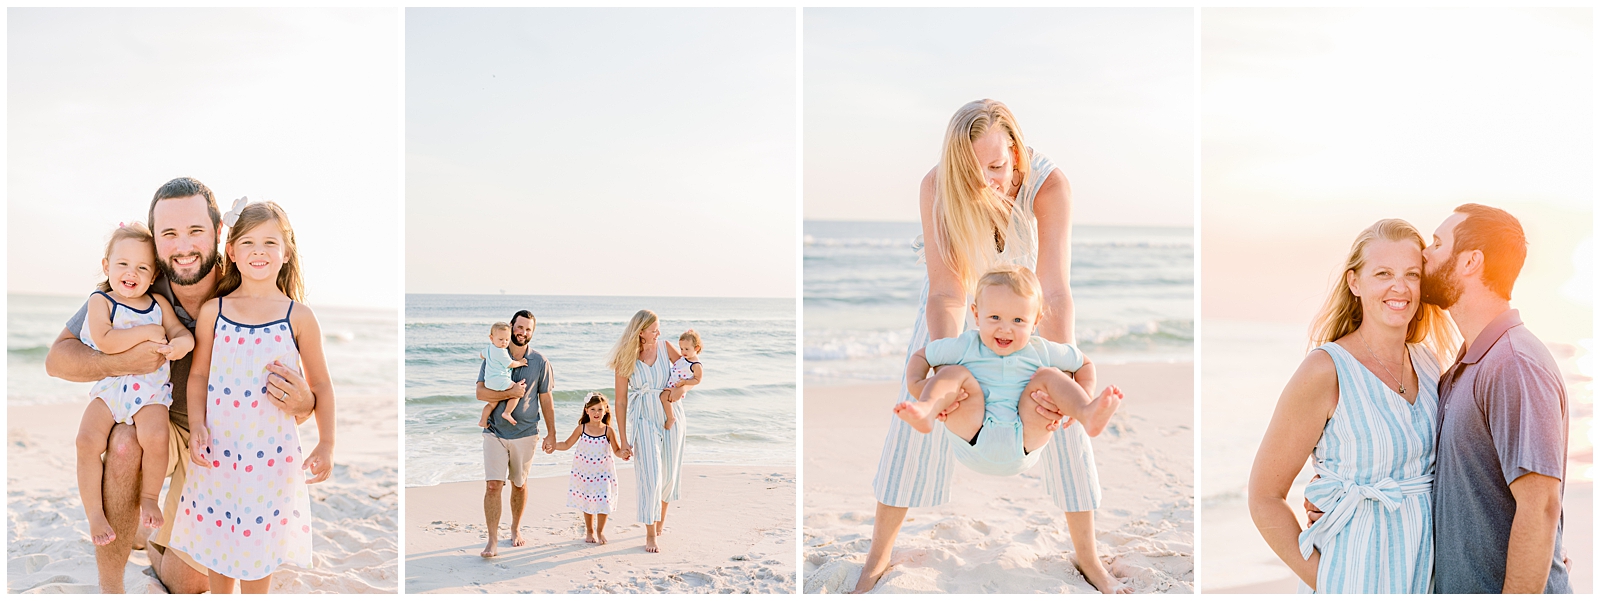 gulf shores alabama family photography jennie tewell 0001